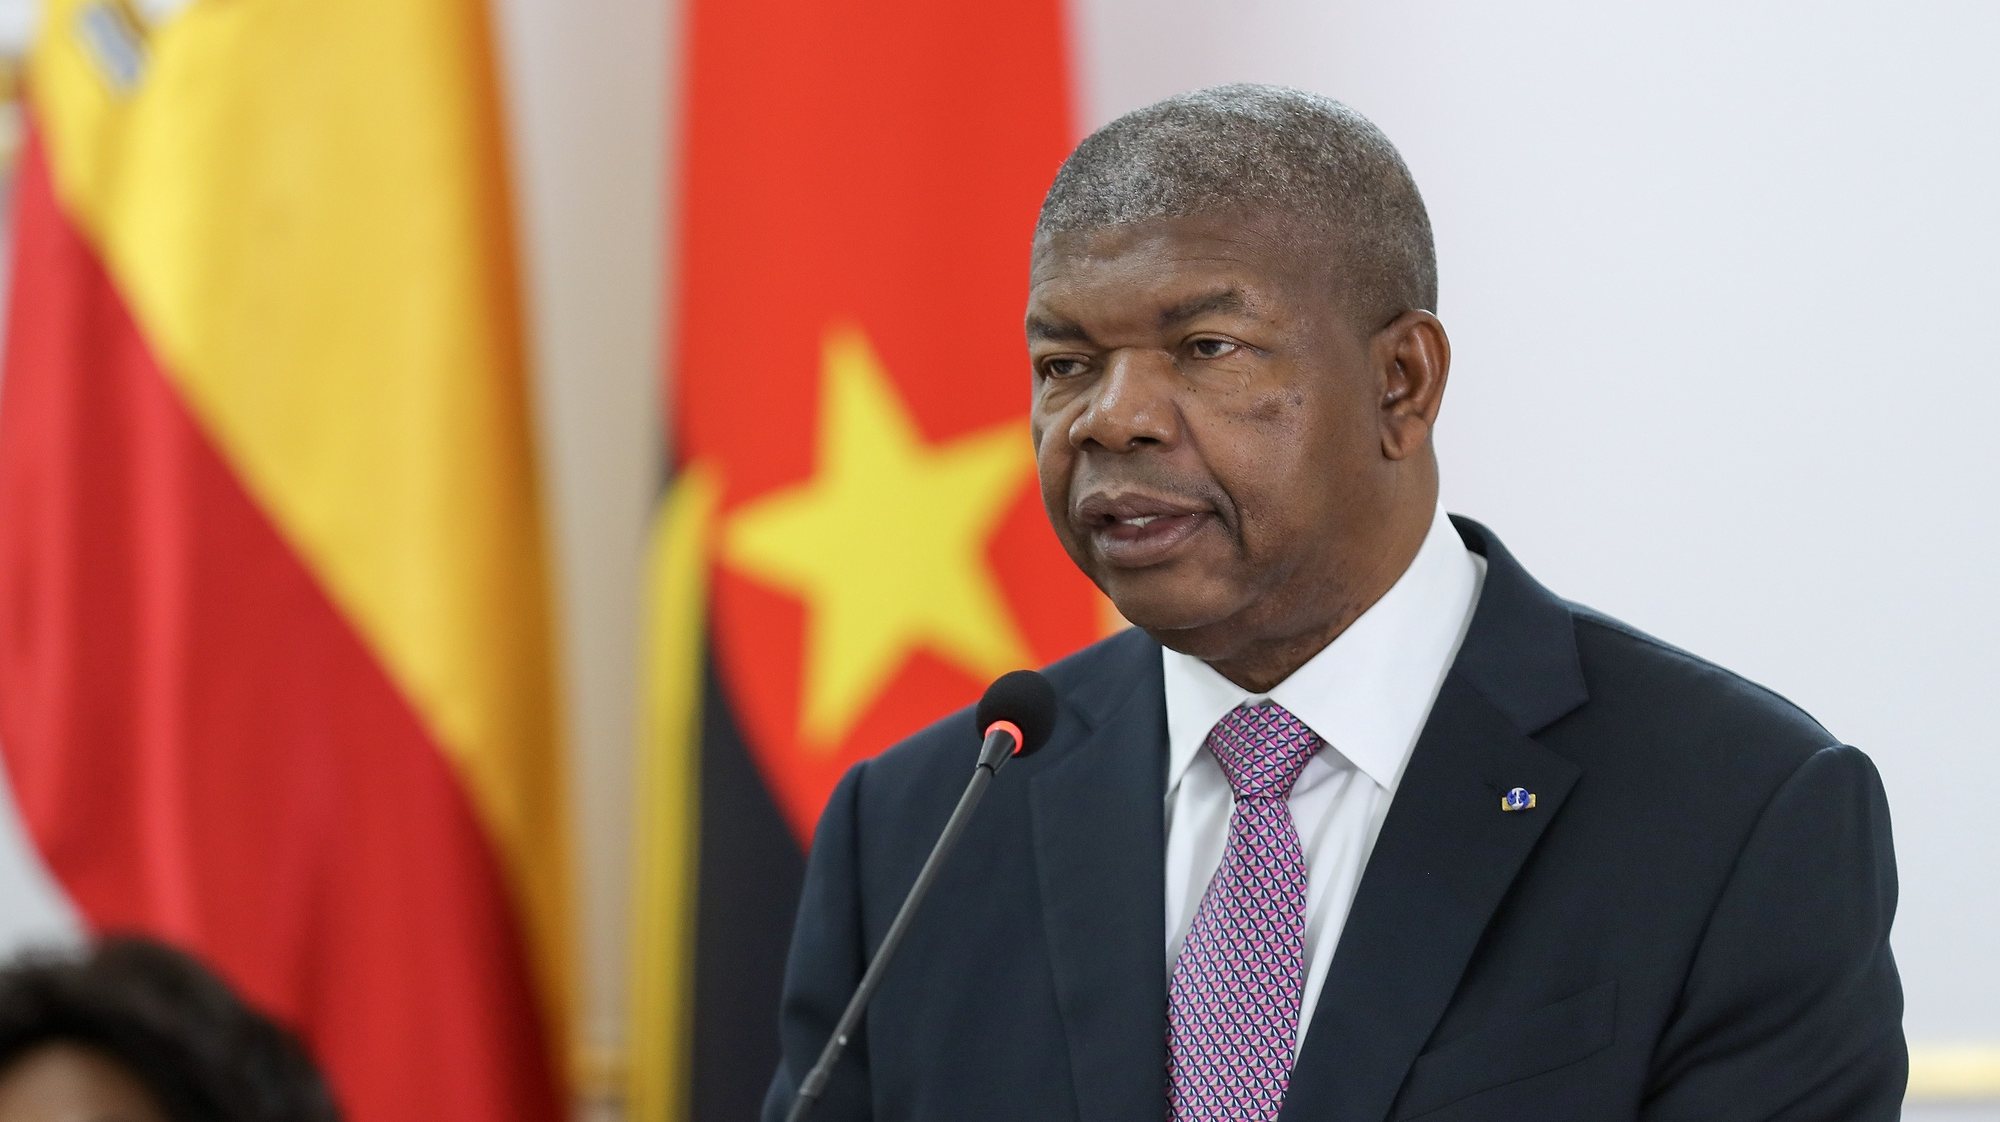 Angolan President, Joao Lourenco, delivers a speech after a meeting with the King of Spain, Felipe VI (unseen), at the Presidential Palace, Angola, Luanda, 7th February 2023. The Kings of Spain are on a three day official visit to Angola. AMPE ROGÉRIO/LUSA